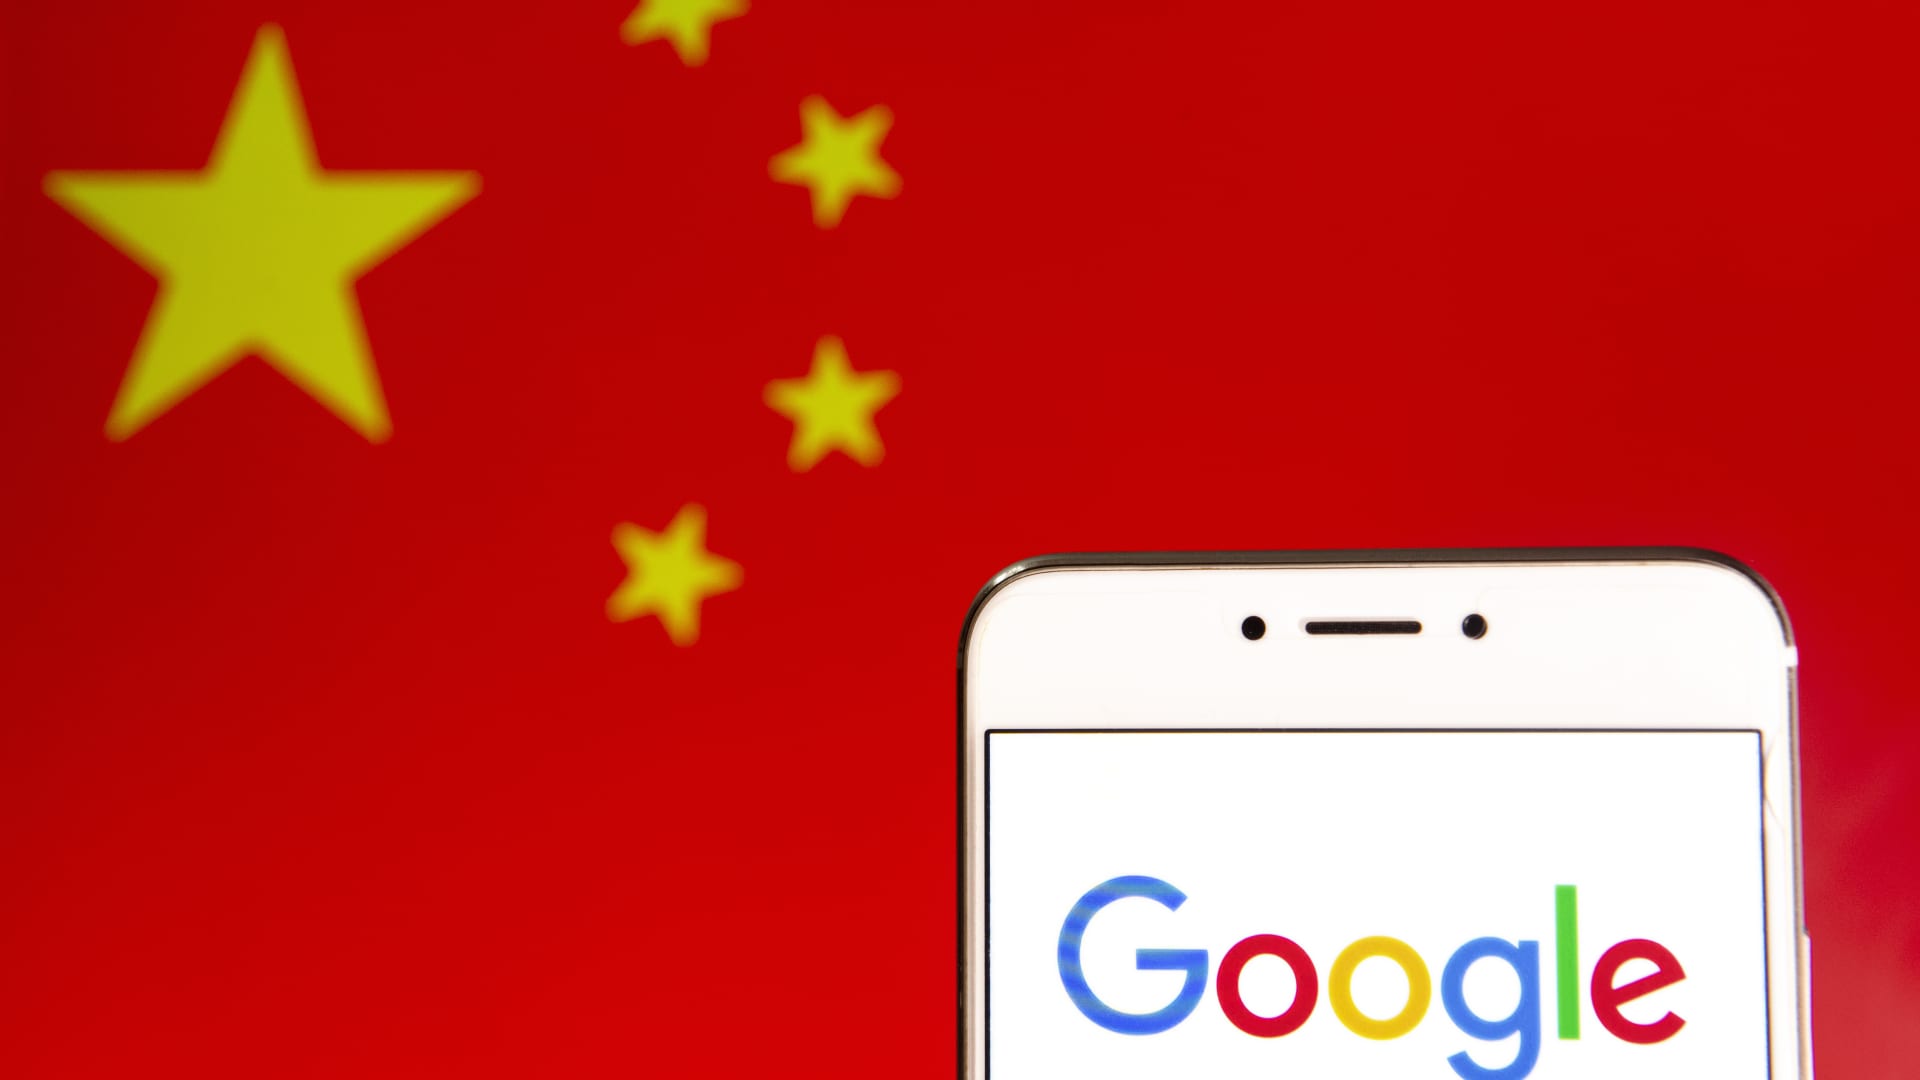 Google shuts down its translation service in China